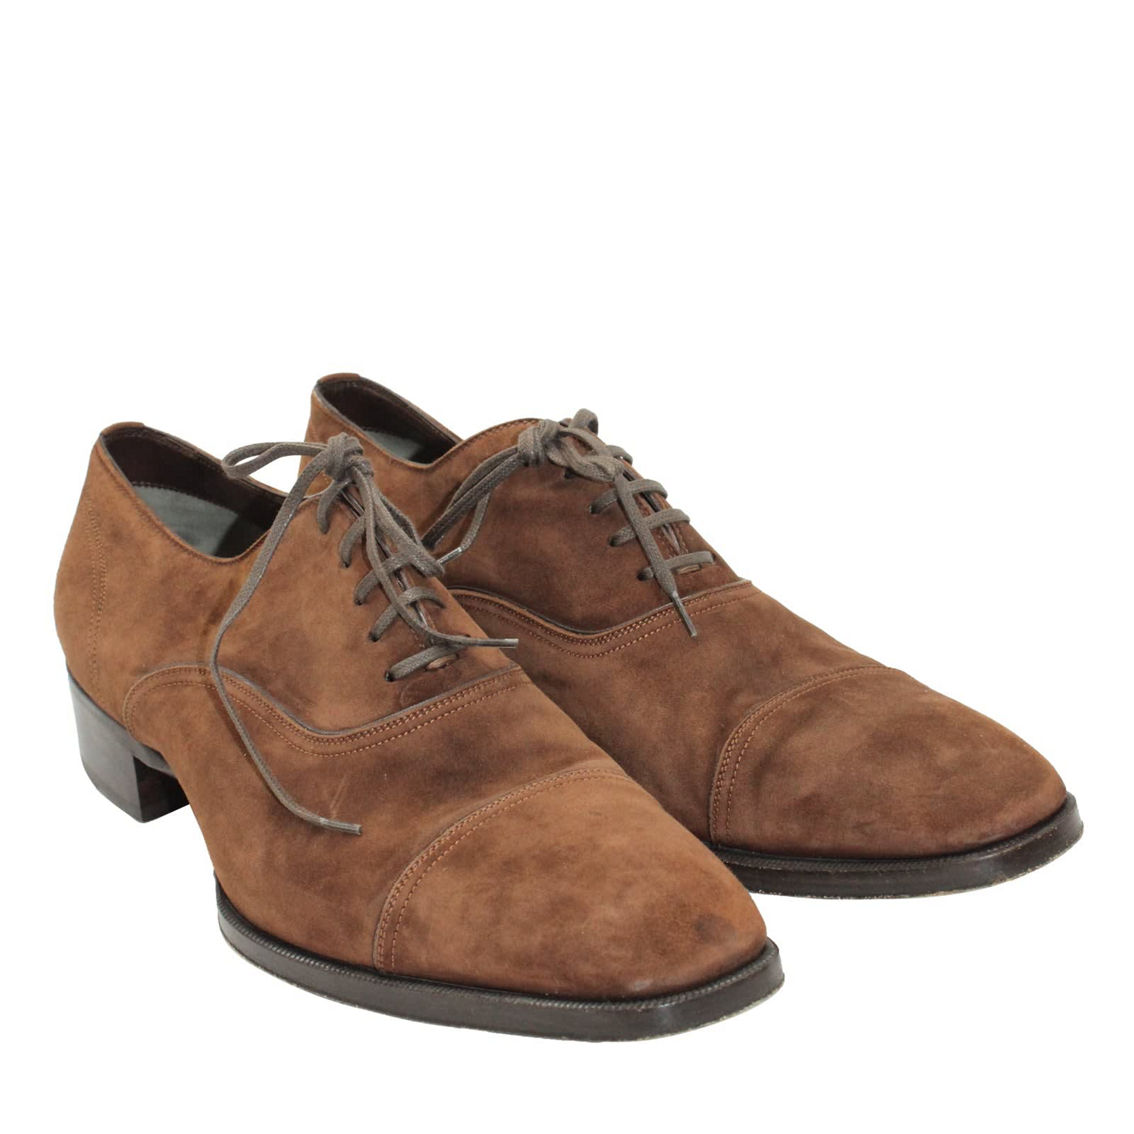 Tom Ford Clayton Cap Toe Oxford Shoes in Brown Suede (Pre-Owned) - Image 3 of 5